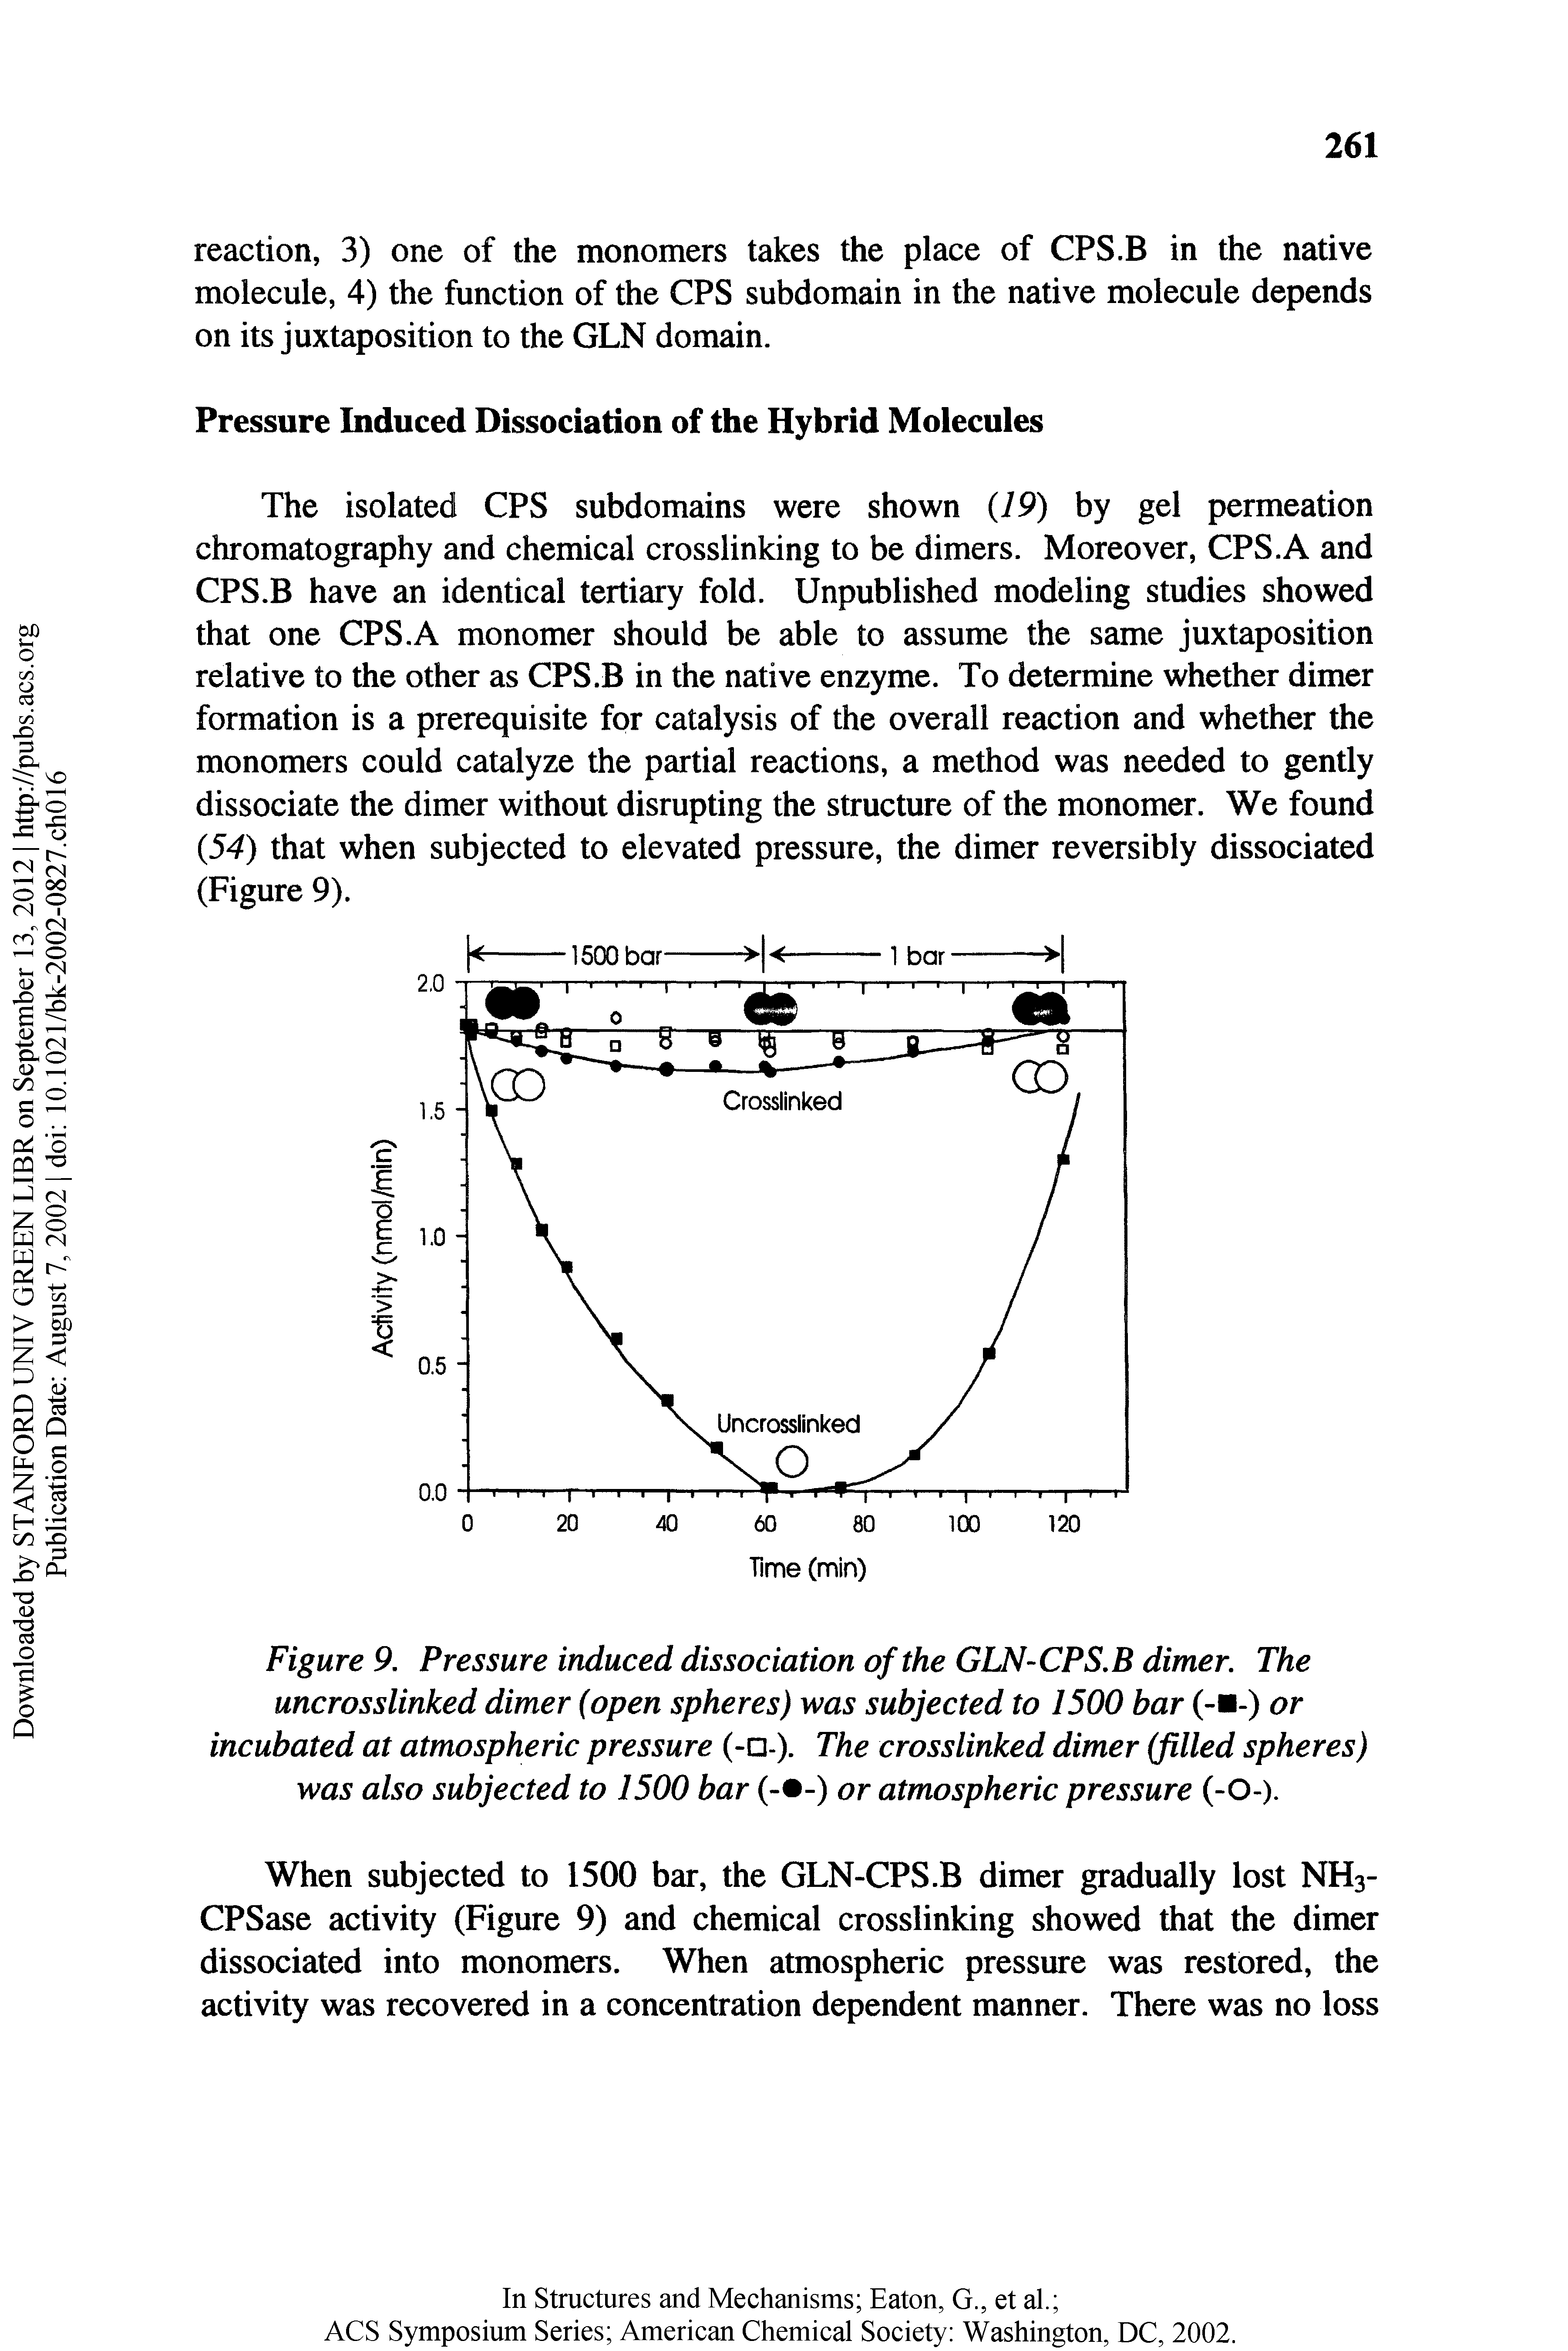 Figure 9. Pressure induced dissociation of the GLN-CPS.B dimer. The uncrosslinked dimer (open spheres) was subjected to 1500 bar (- -) or incubated at atmospheric pressure (- -). The crosslinked dimer (filled spheres) was also subjected to 1500 bar (- -) or atmospheric pressure (-0-).